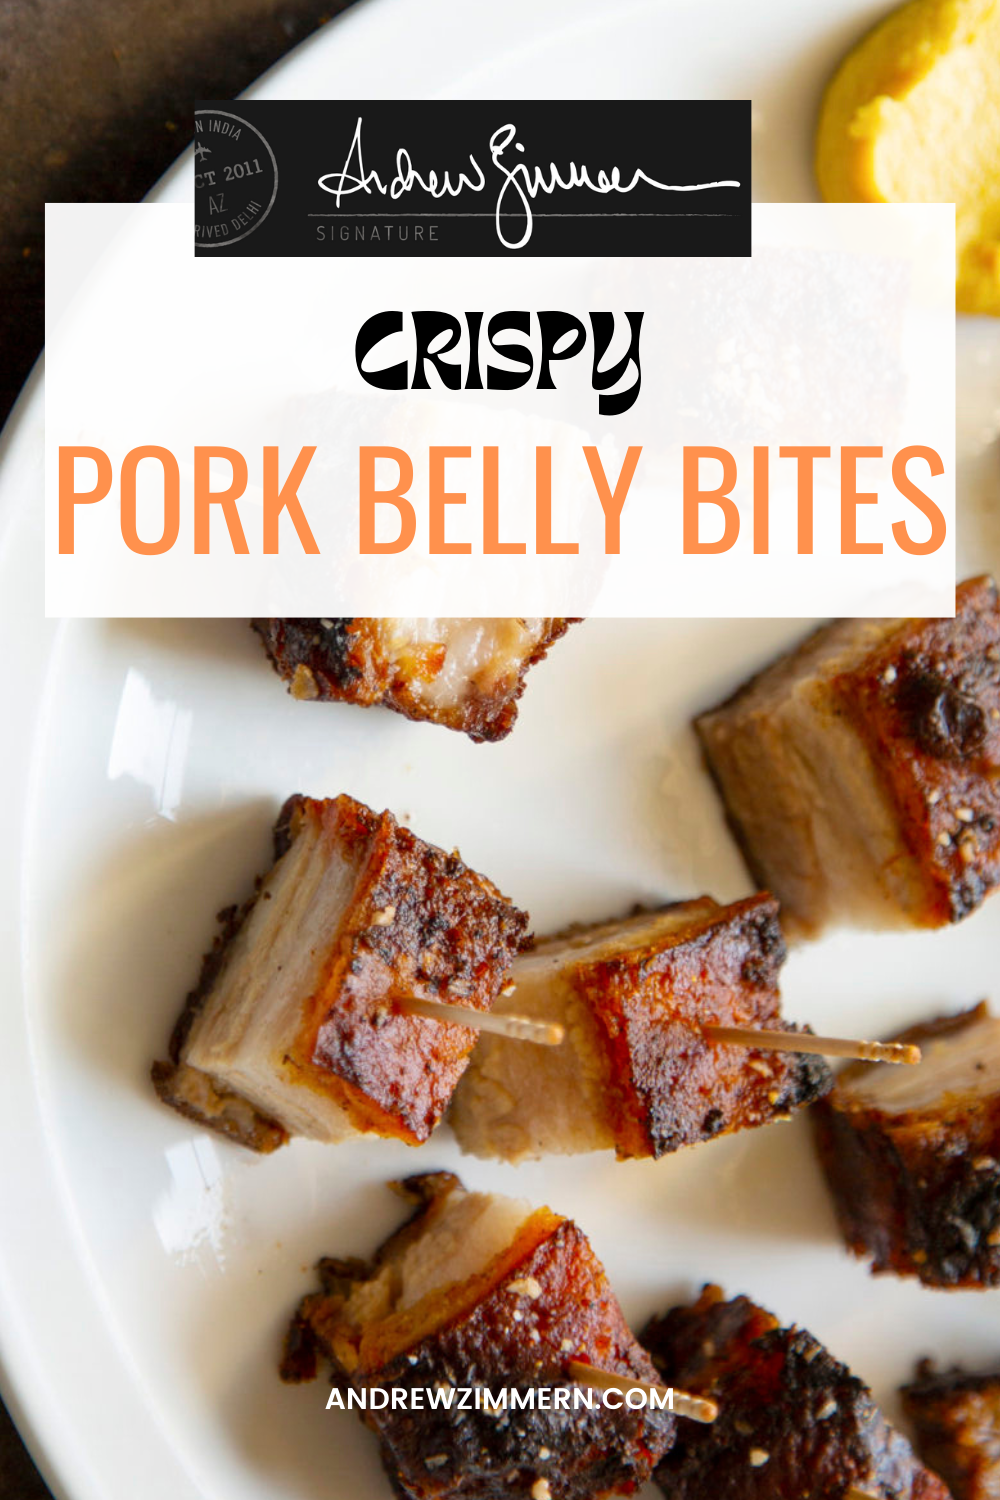 Roasted pork belly is one of the most unctuous, delicious dishes that you’ll ever eat. To achieve a meltingly tender piece of pork crowned with crispy skin requires a multi-day process, but don't let that scare you, it's a simple technique. Serve it with bao, or on its own dim sum-style with hoisin, ginger scallion oil, hot sesame oil dipping sauce or soy and ginger dipping sauce.